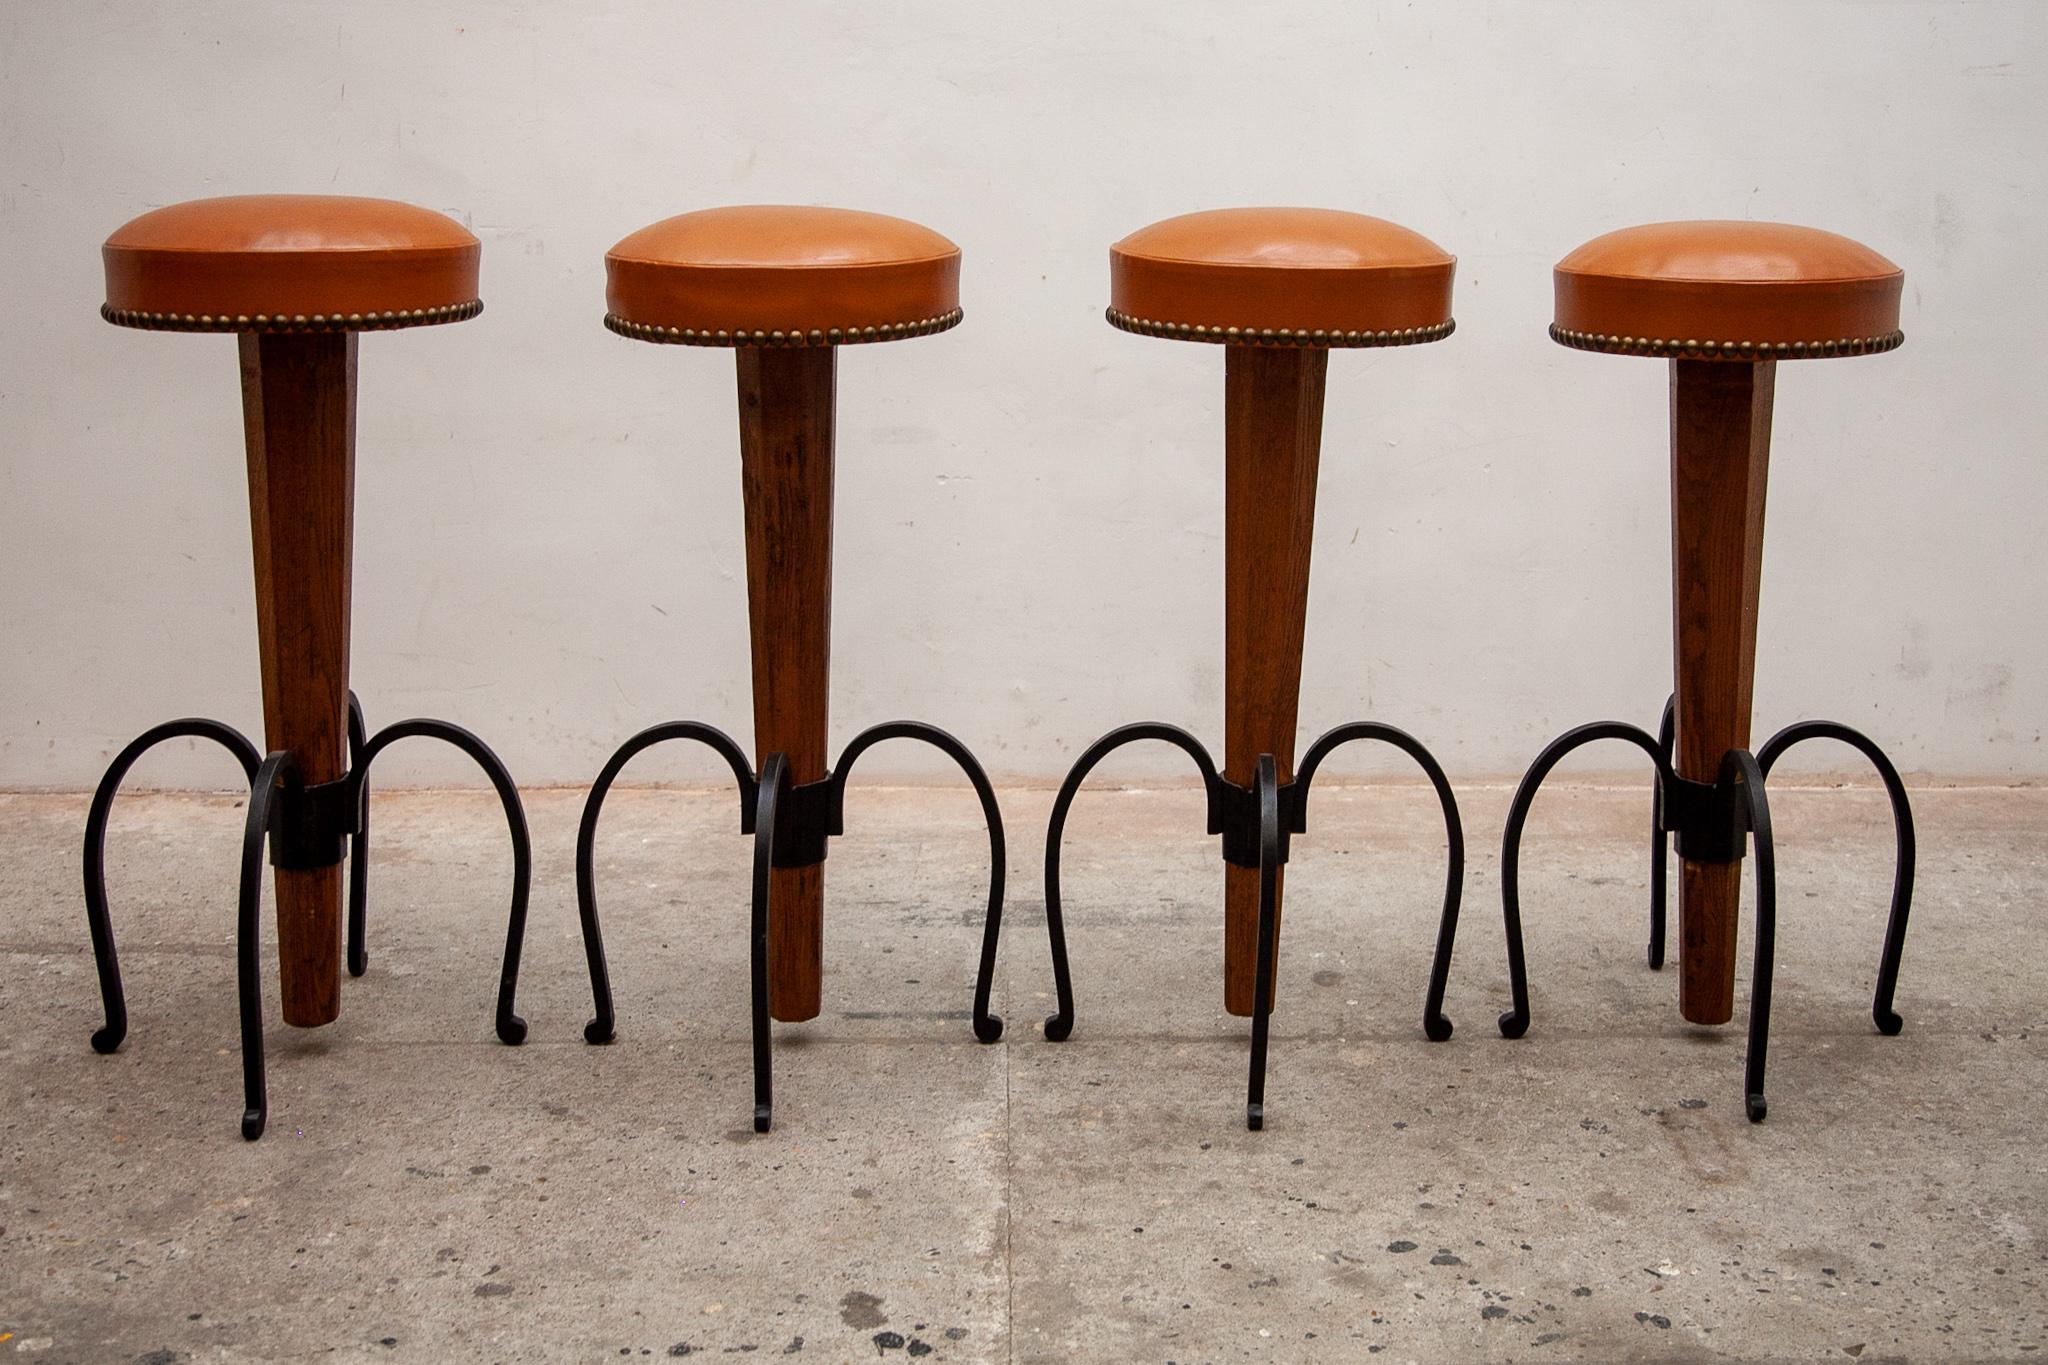 Set of four Brutalist Stools Wrought Iron, Round Camel Leather Seats 3